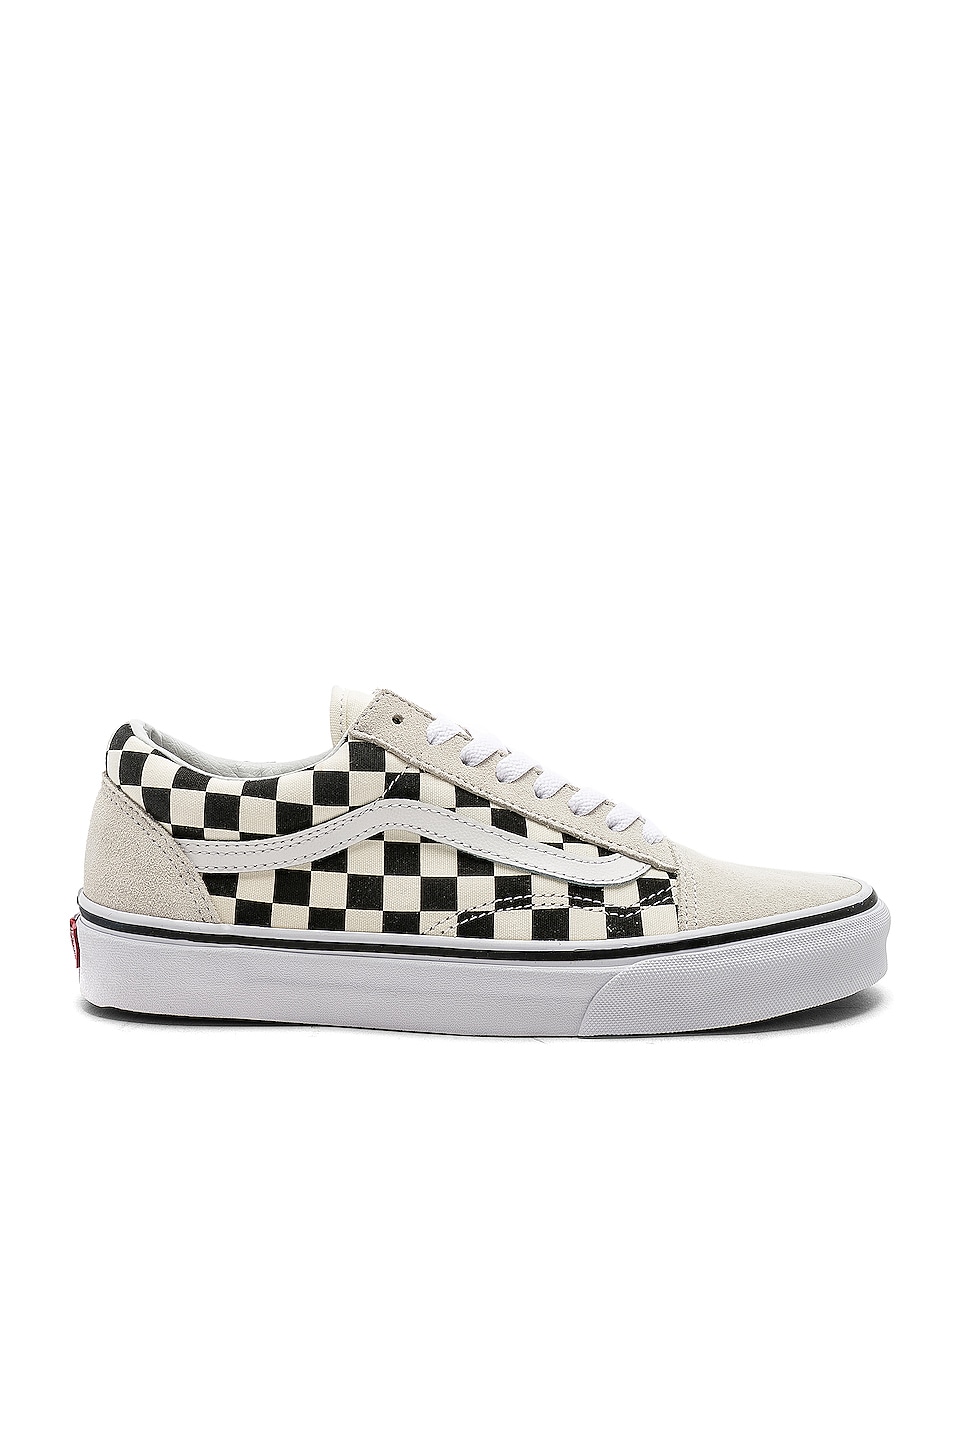 black and white checkered vans old school